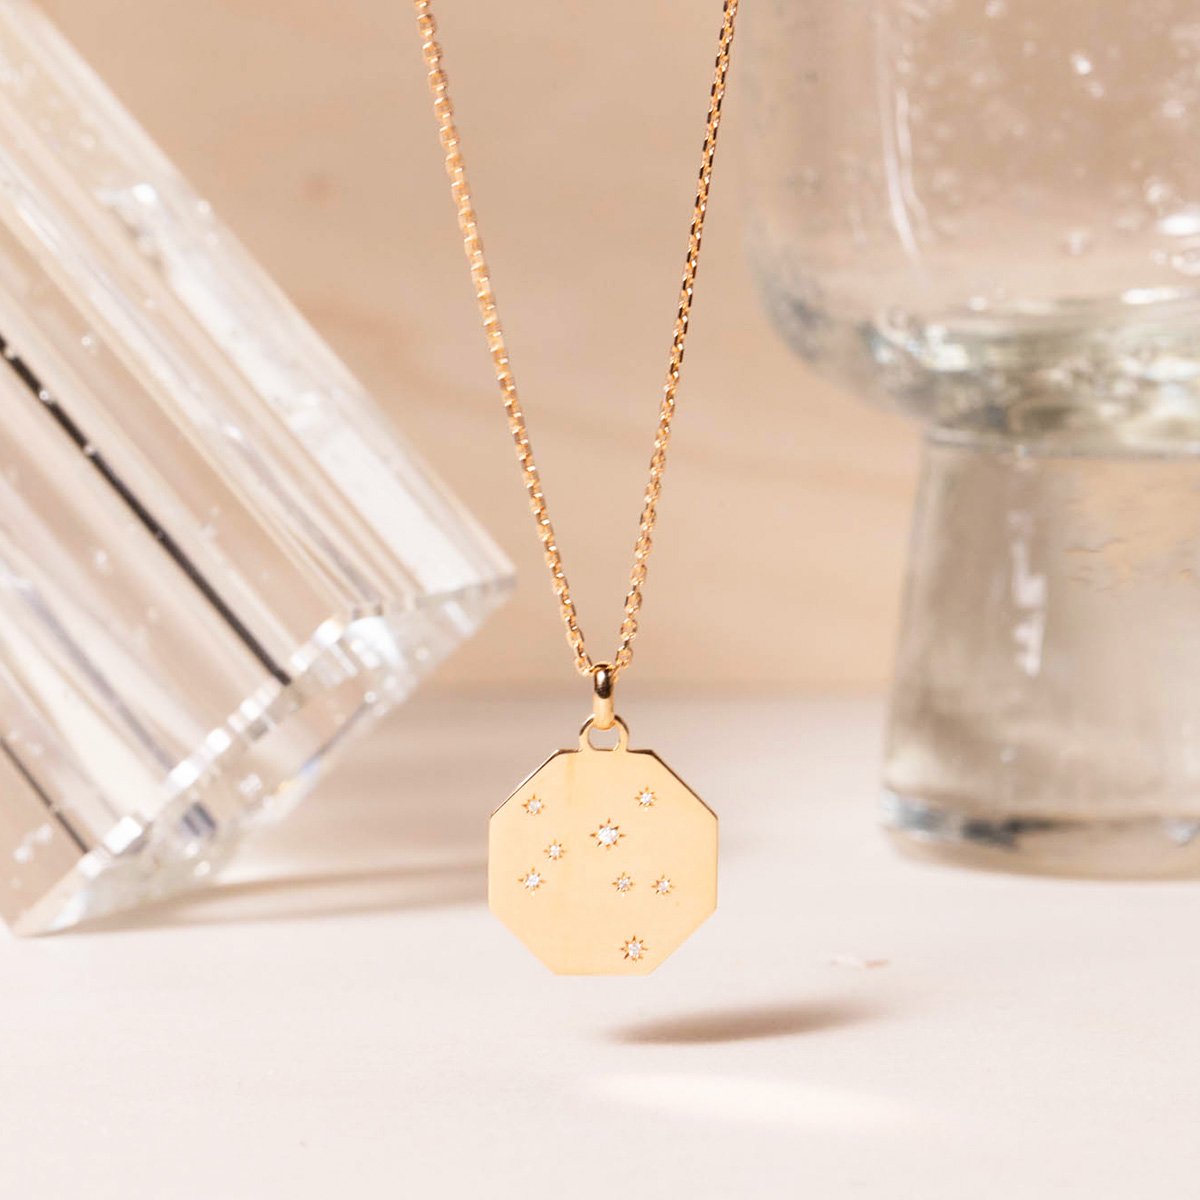 Constellation medal - 18-carat yellow gold and diamonds